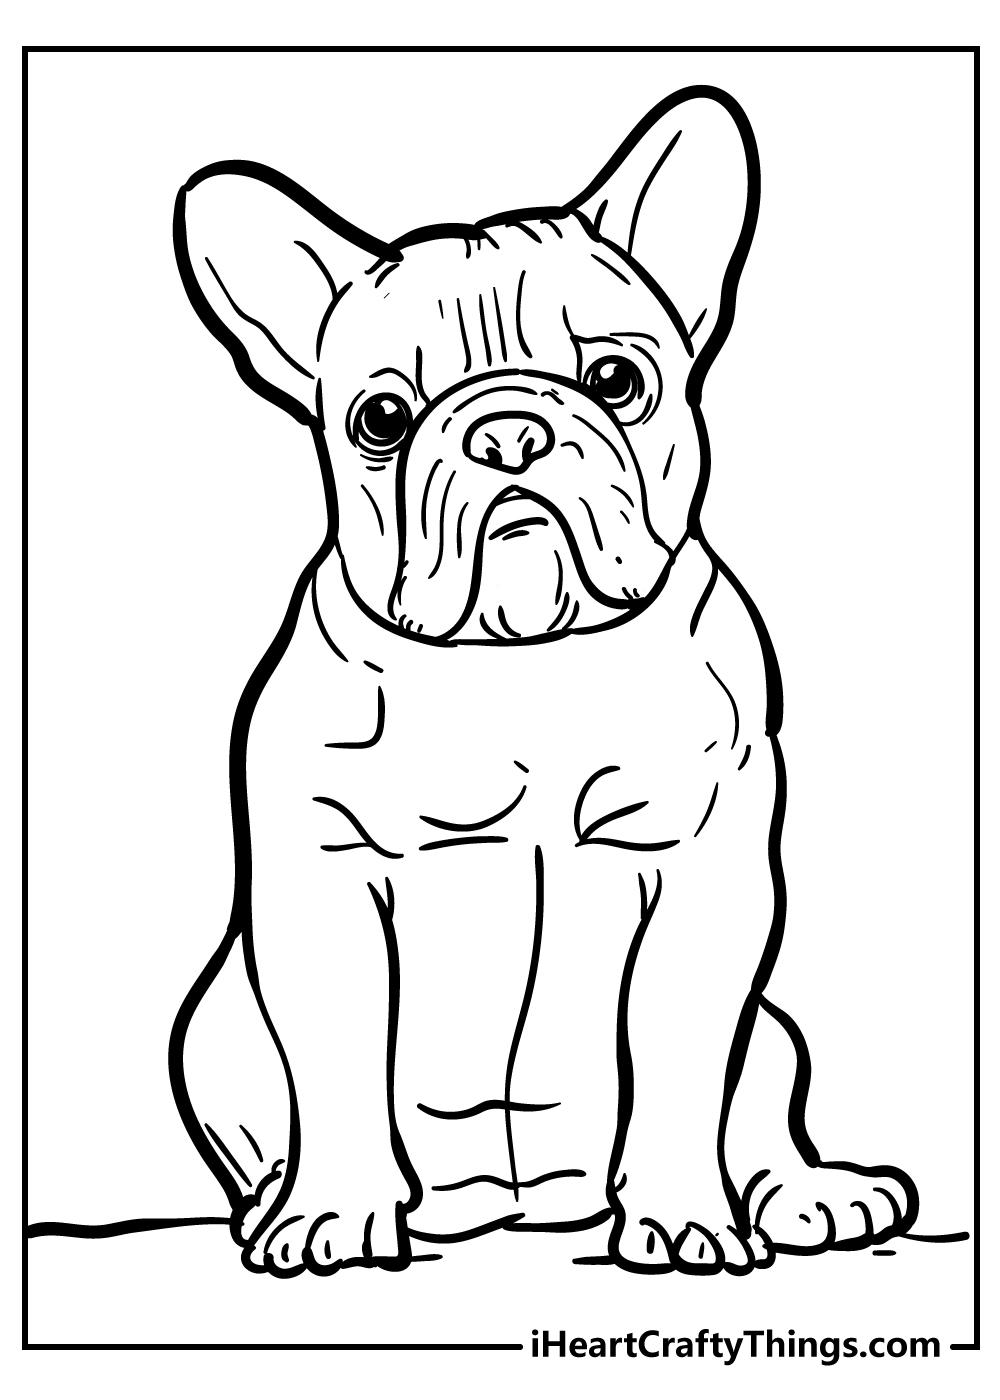 Dog Coloring Pages - Super Adorable And 100% Free (2022)